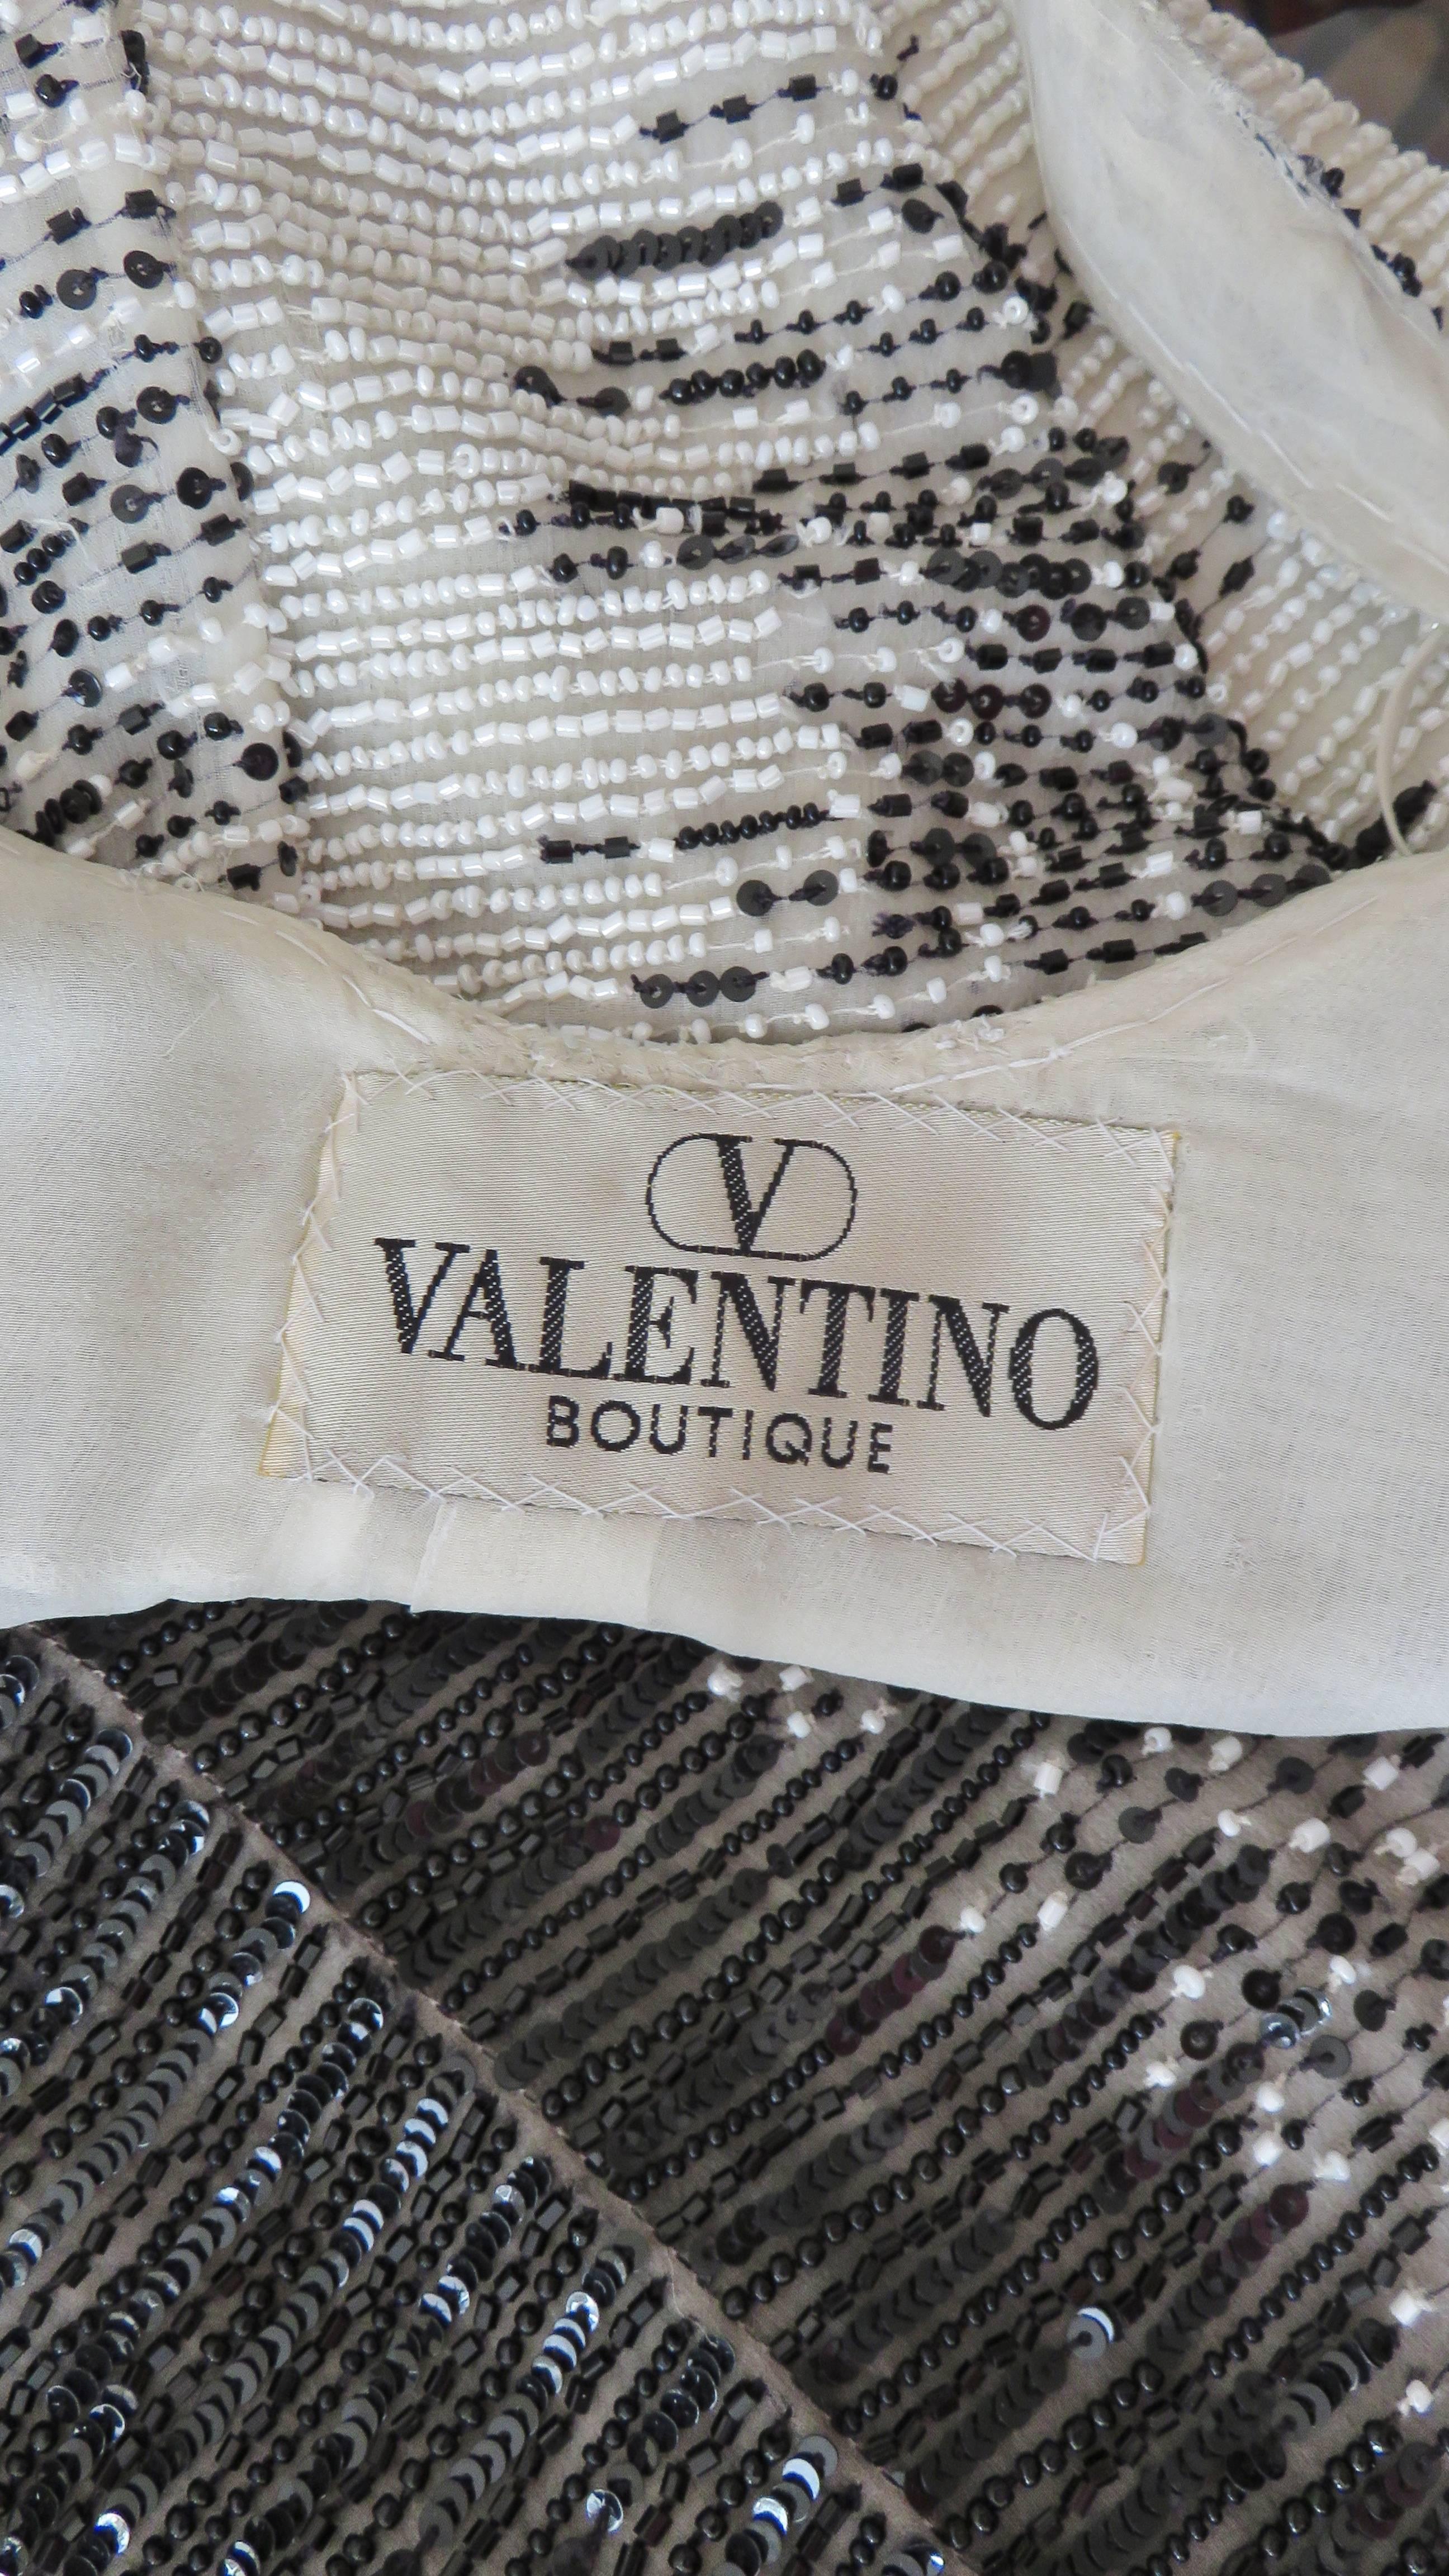 Valentino Boutique Black and White Beaded Dress For Sale 5